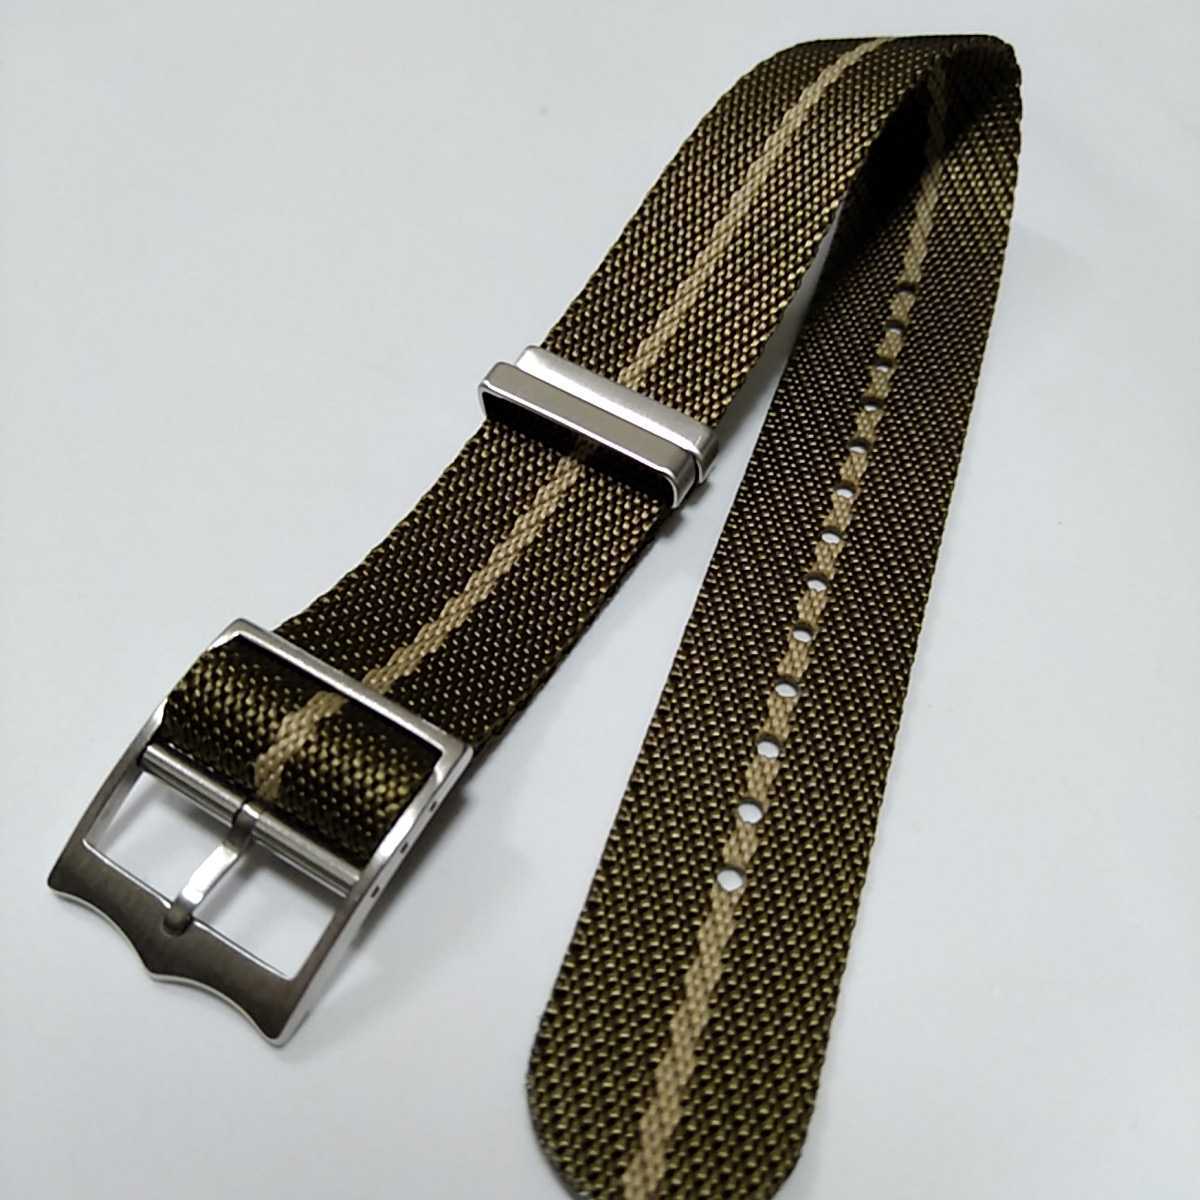 @ new goods immediately shipping 22mm olive high grade nylon NATO type wristwatch belt exchange for strap military chu-da-. recommended 